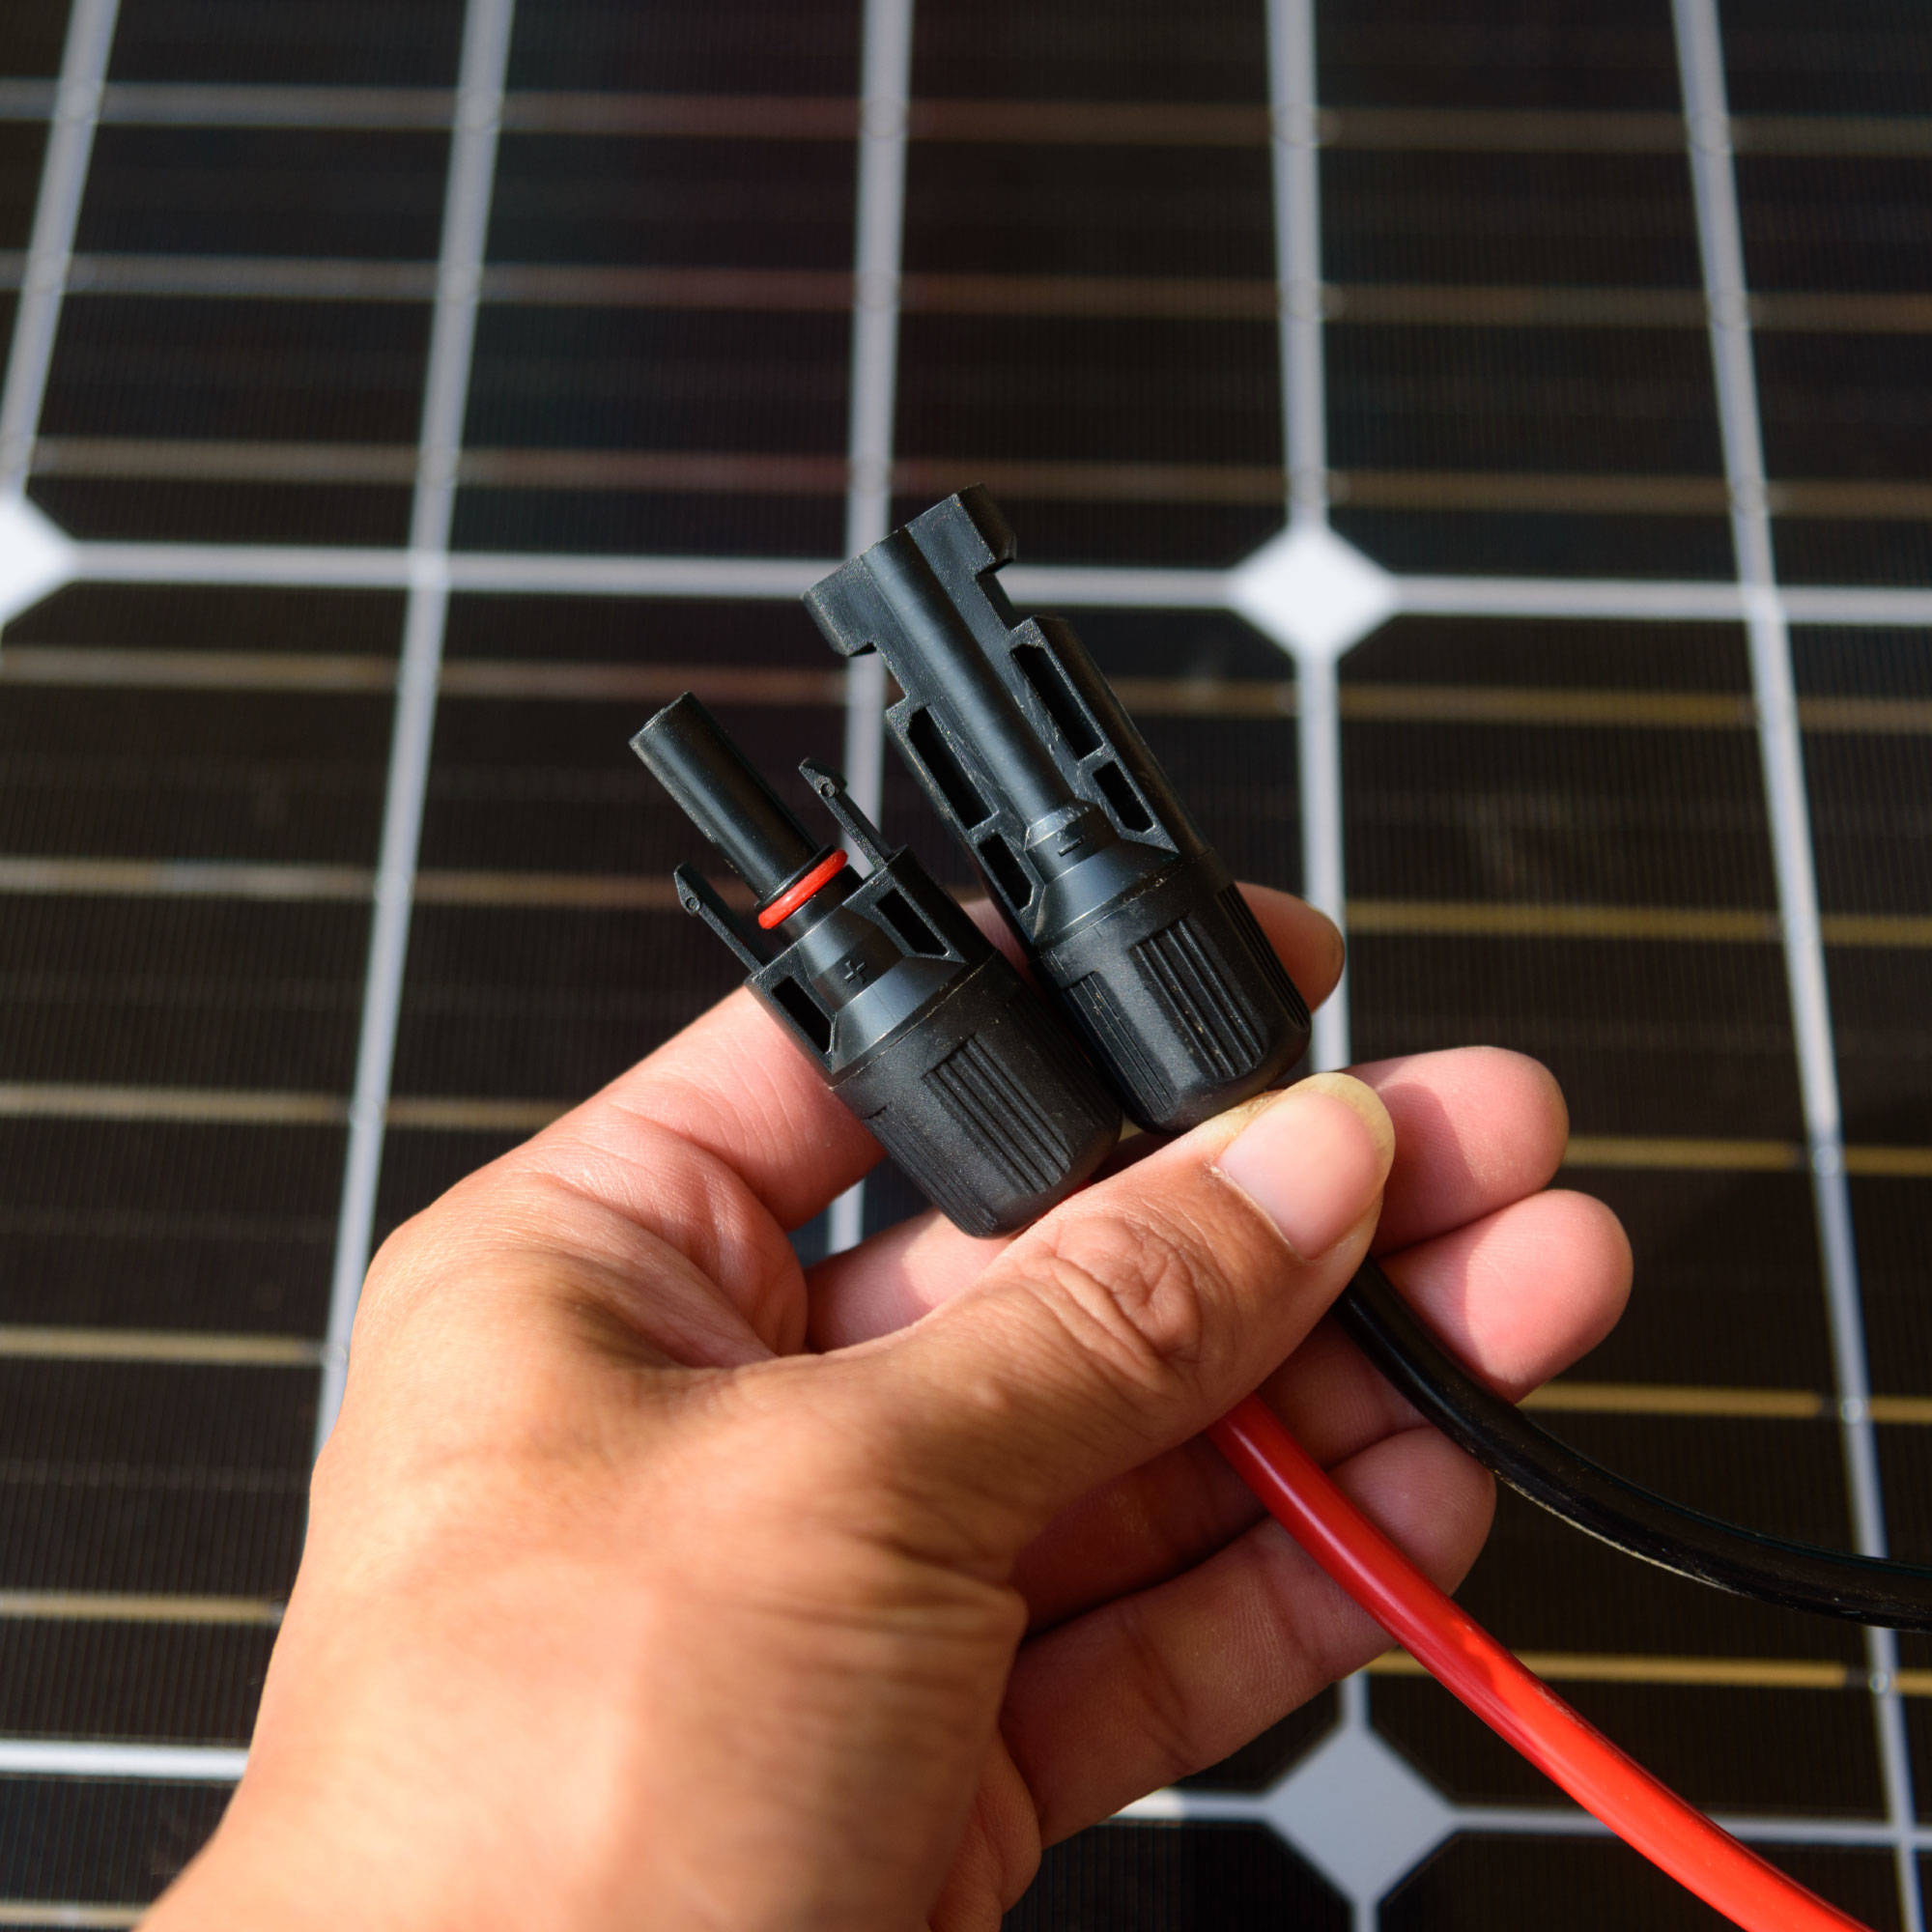 Solar connection cable 4 mm² red/black - 2.5m